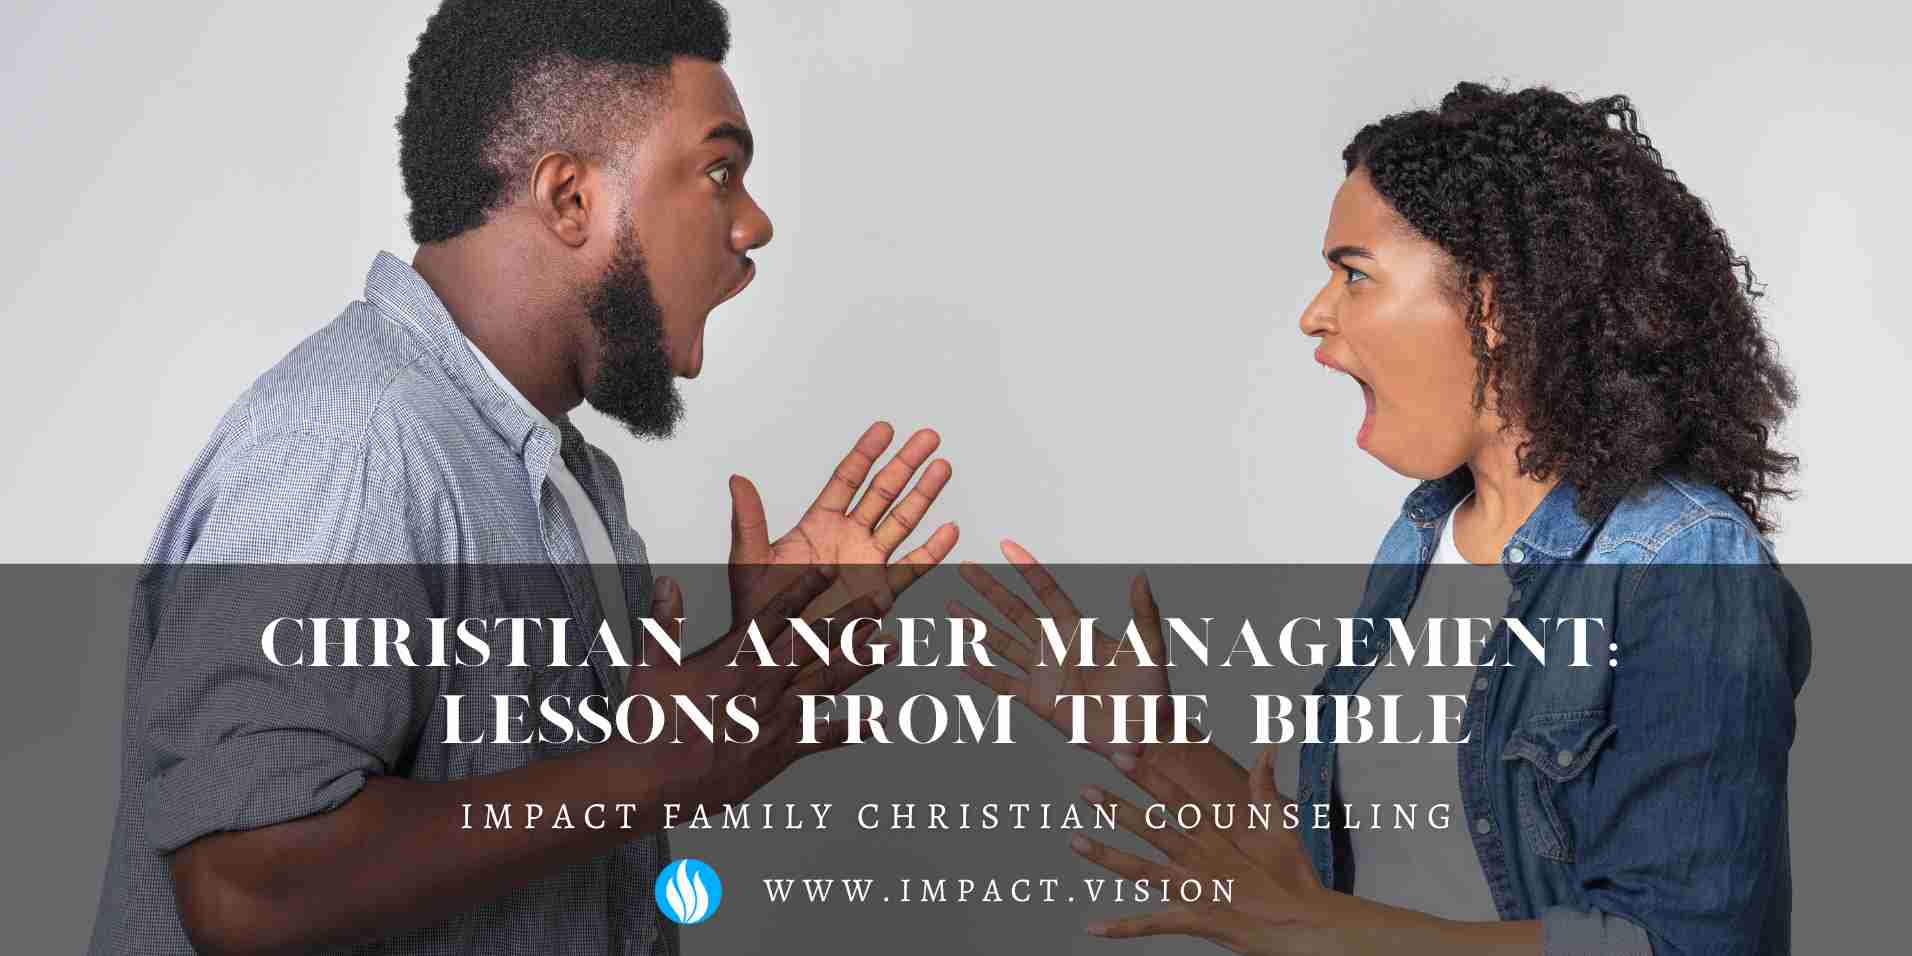  Christian Anger Management: Lessons from the Bible